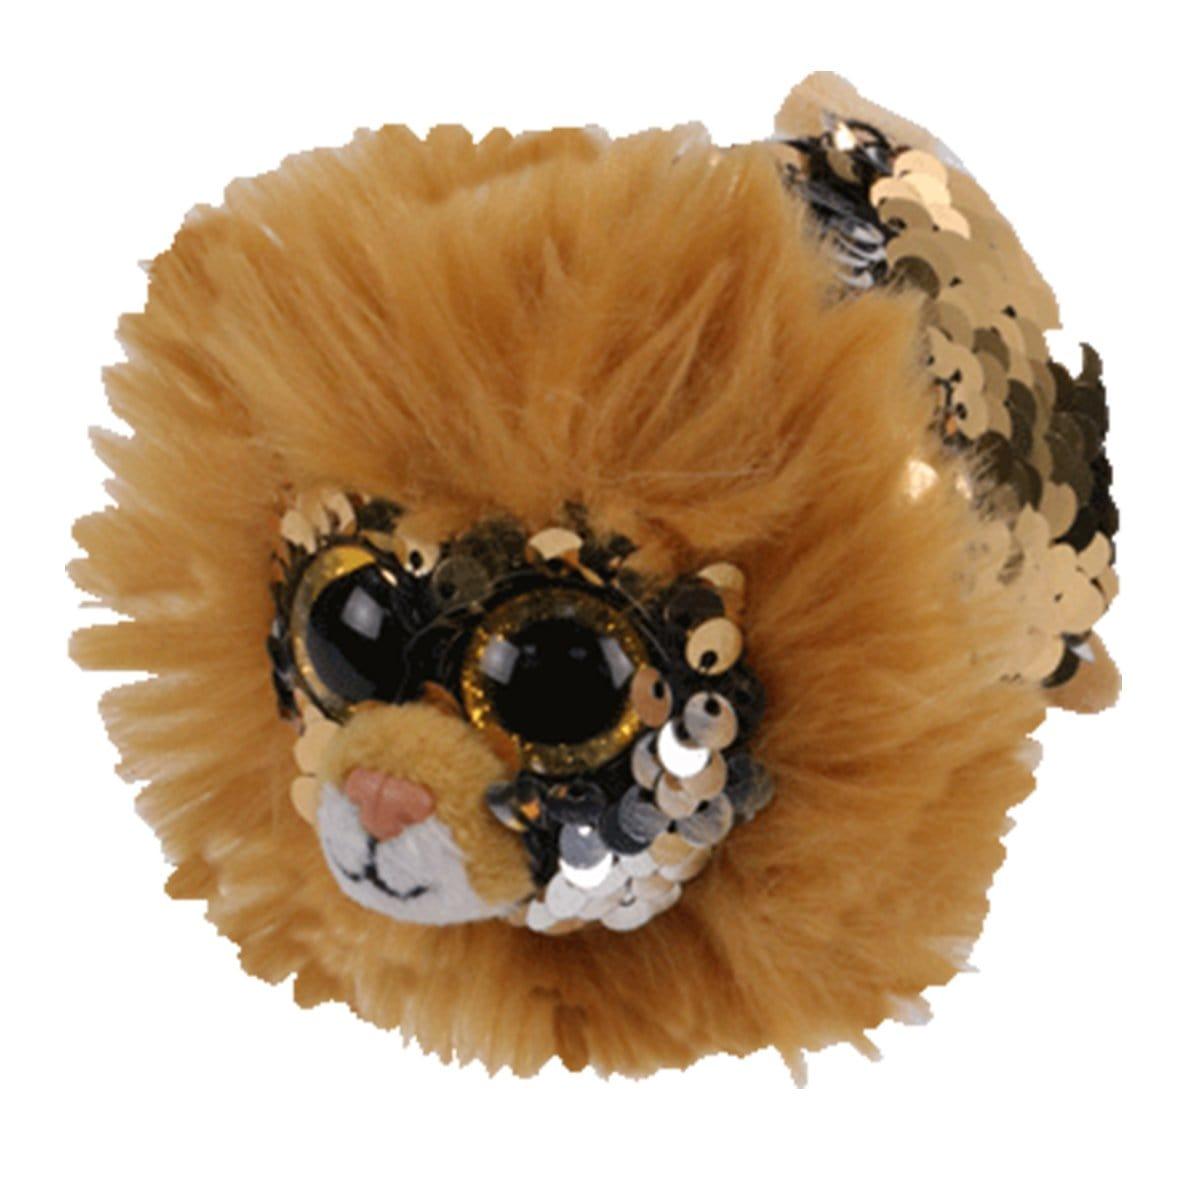 Buy Plushes Teeny Tys Sequin - Regal sold at Party Expert